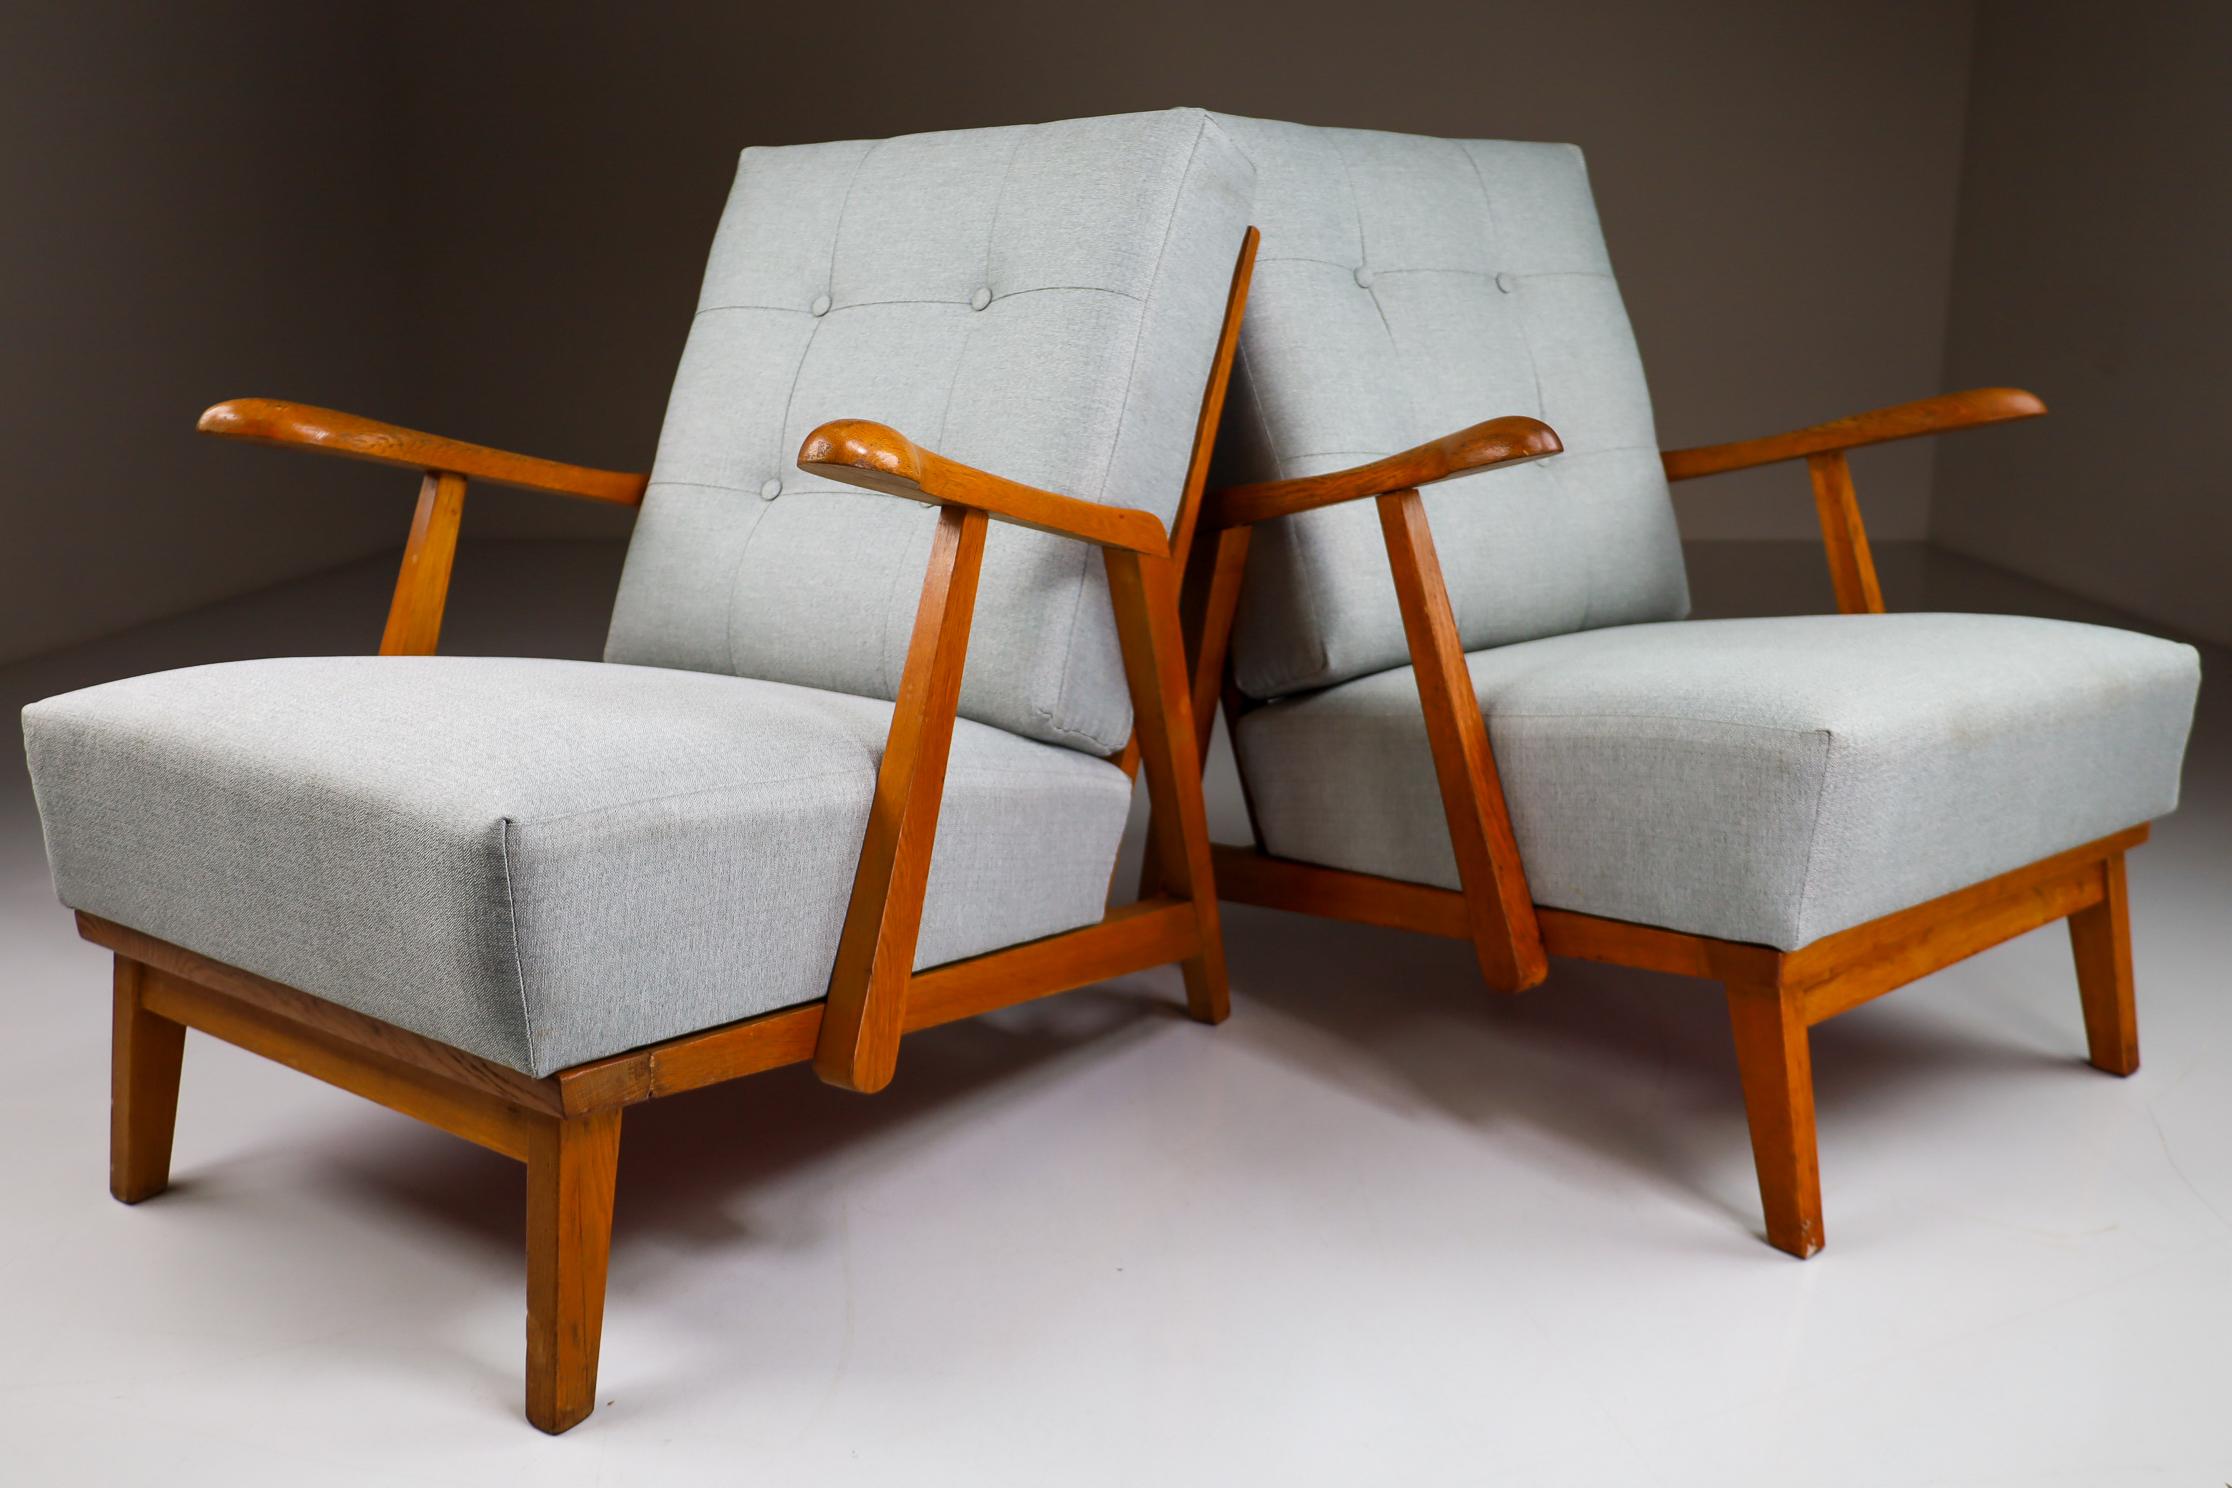 Pair of two original midcentury sculptural armchairs or lounge chairs manufactured and designed in France 1950s. Made of solid oak and professionally reupholstered in. These armchairs would make an eye-catching addition to any interior such as